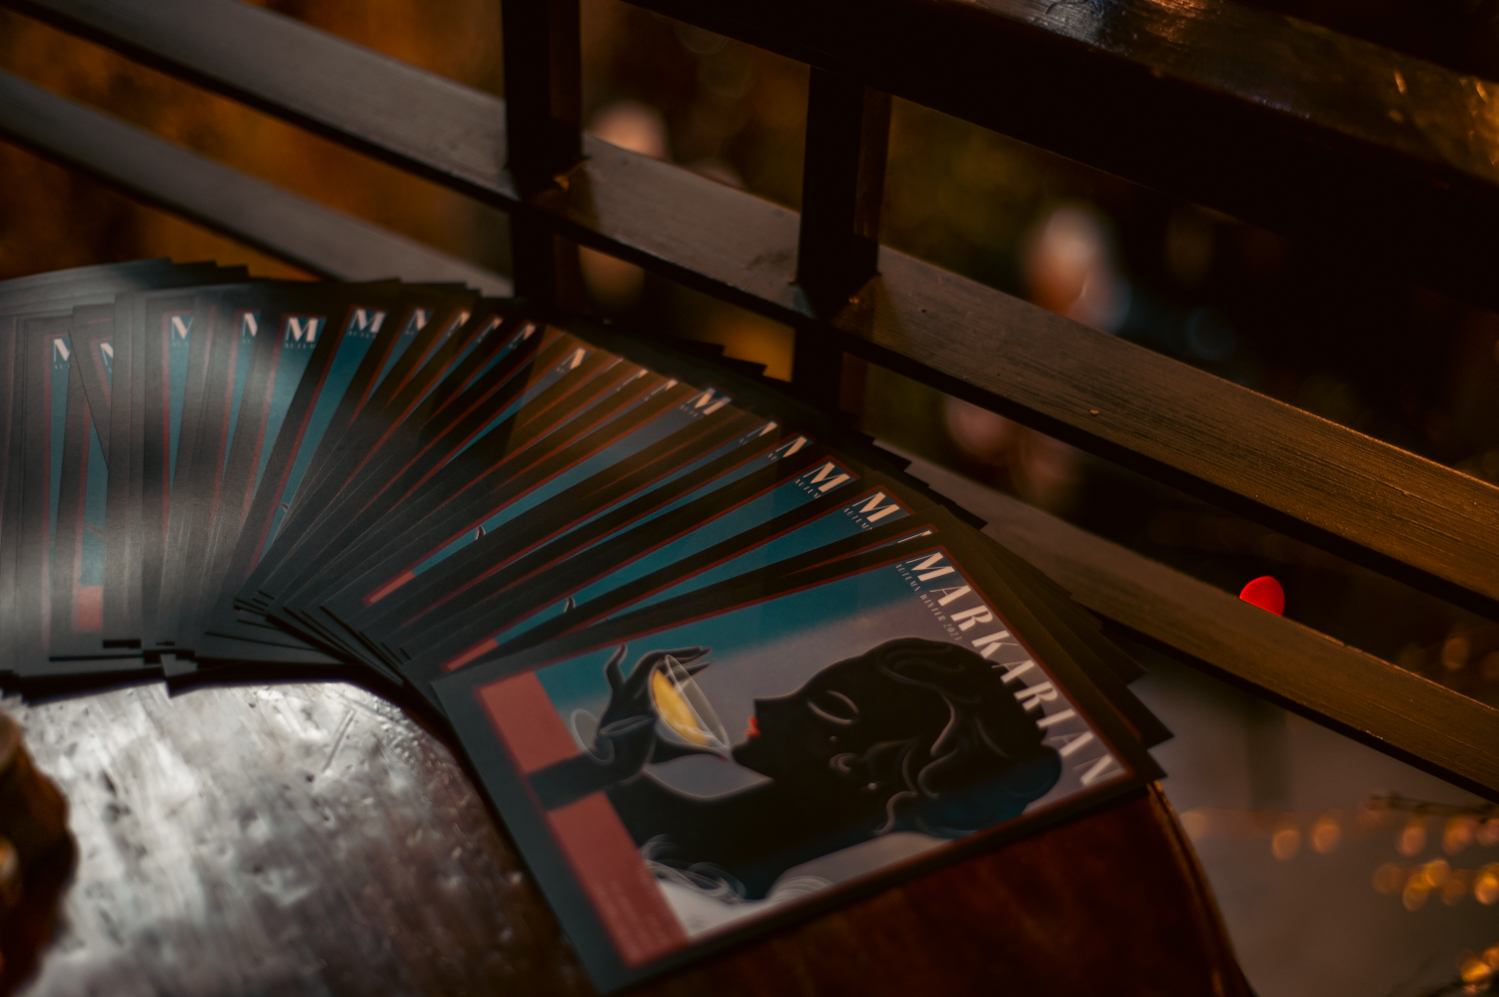 Flyers reading “Markarian” show a woman sipping from a martini glass, and are fanned out across a wooden table.